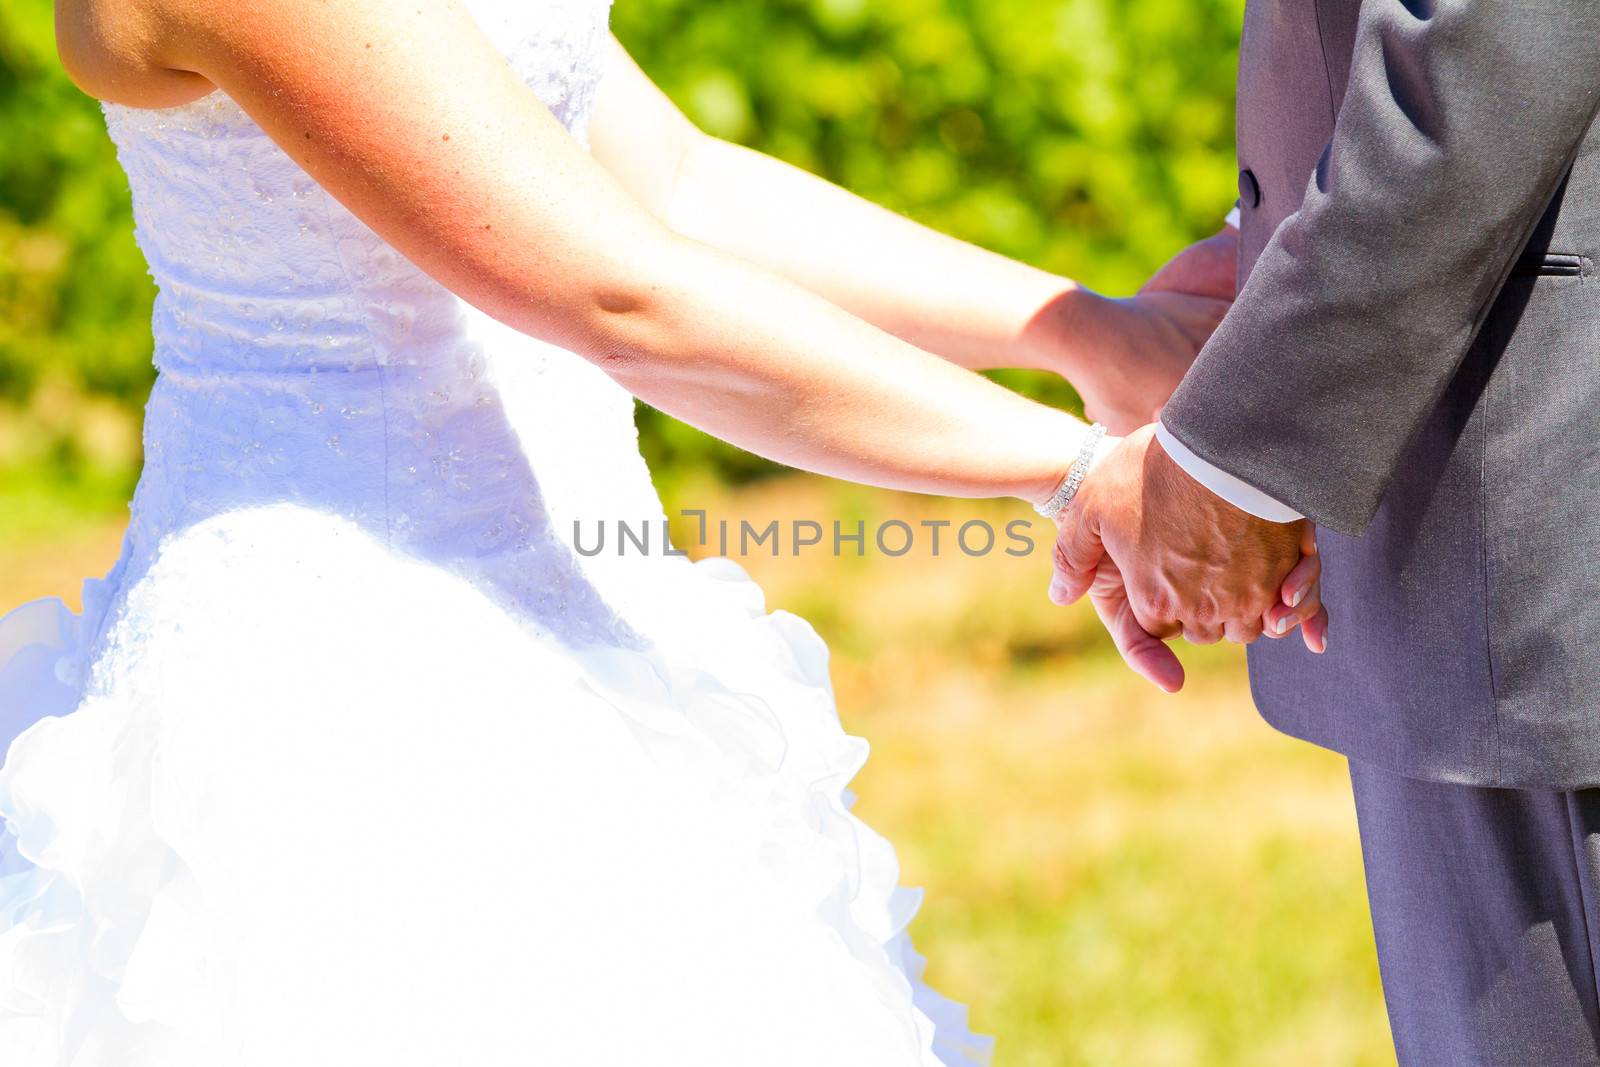 A bride and groom are close together showing just their torso arms and hands while holding each other after their wedding.